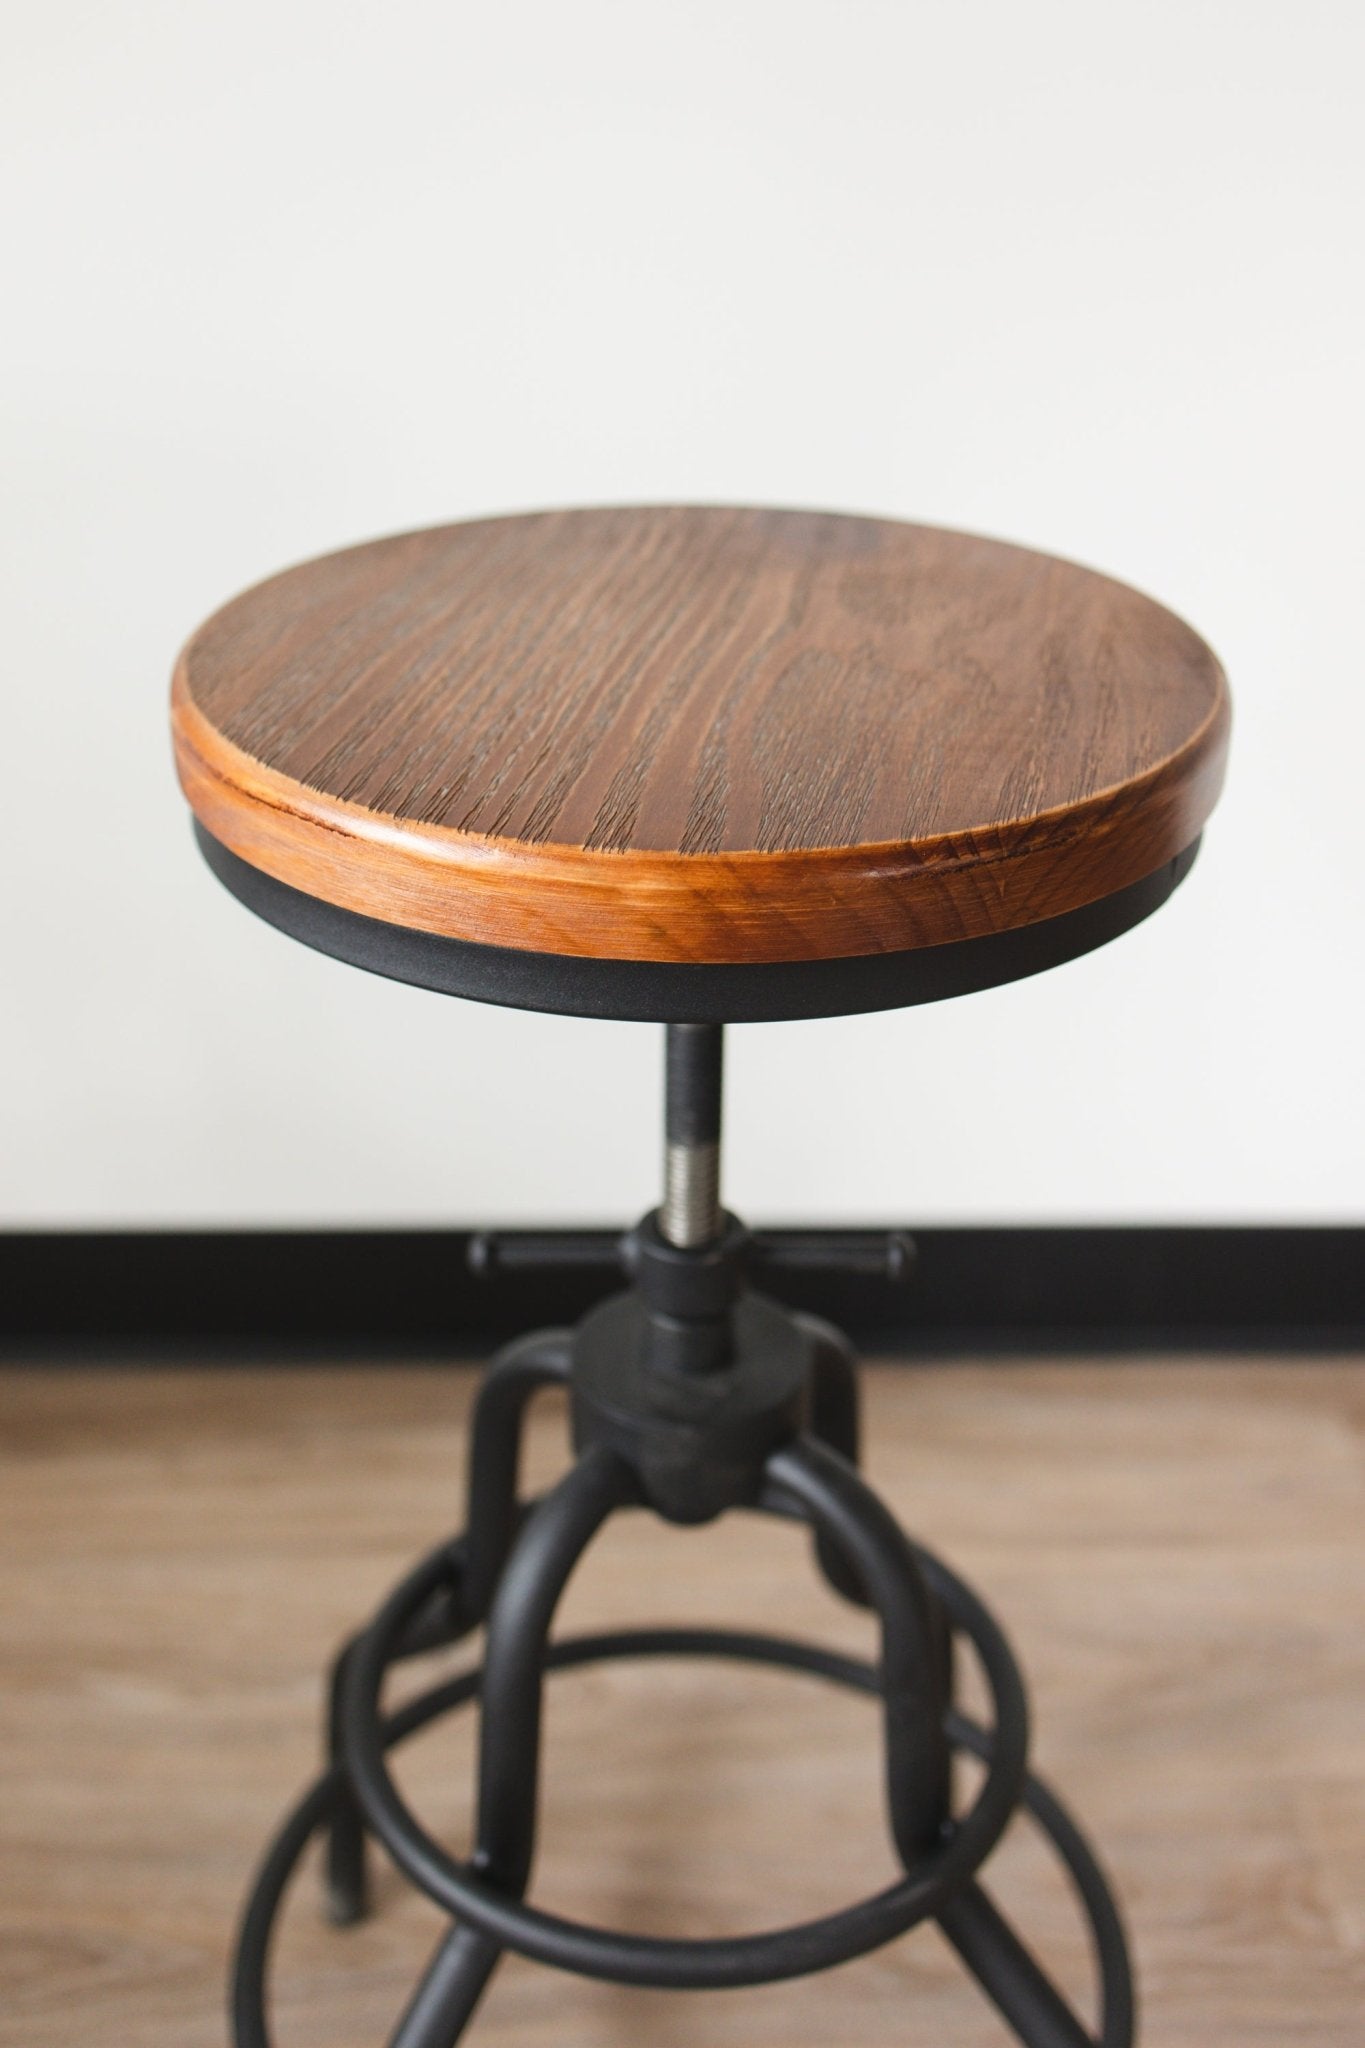 The Industrial Swivel Stool - FargoWoodworks